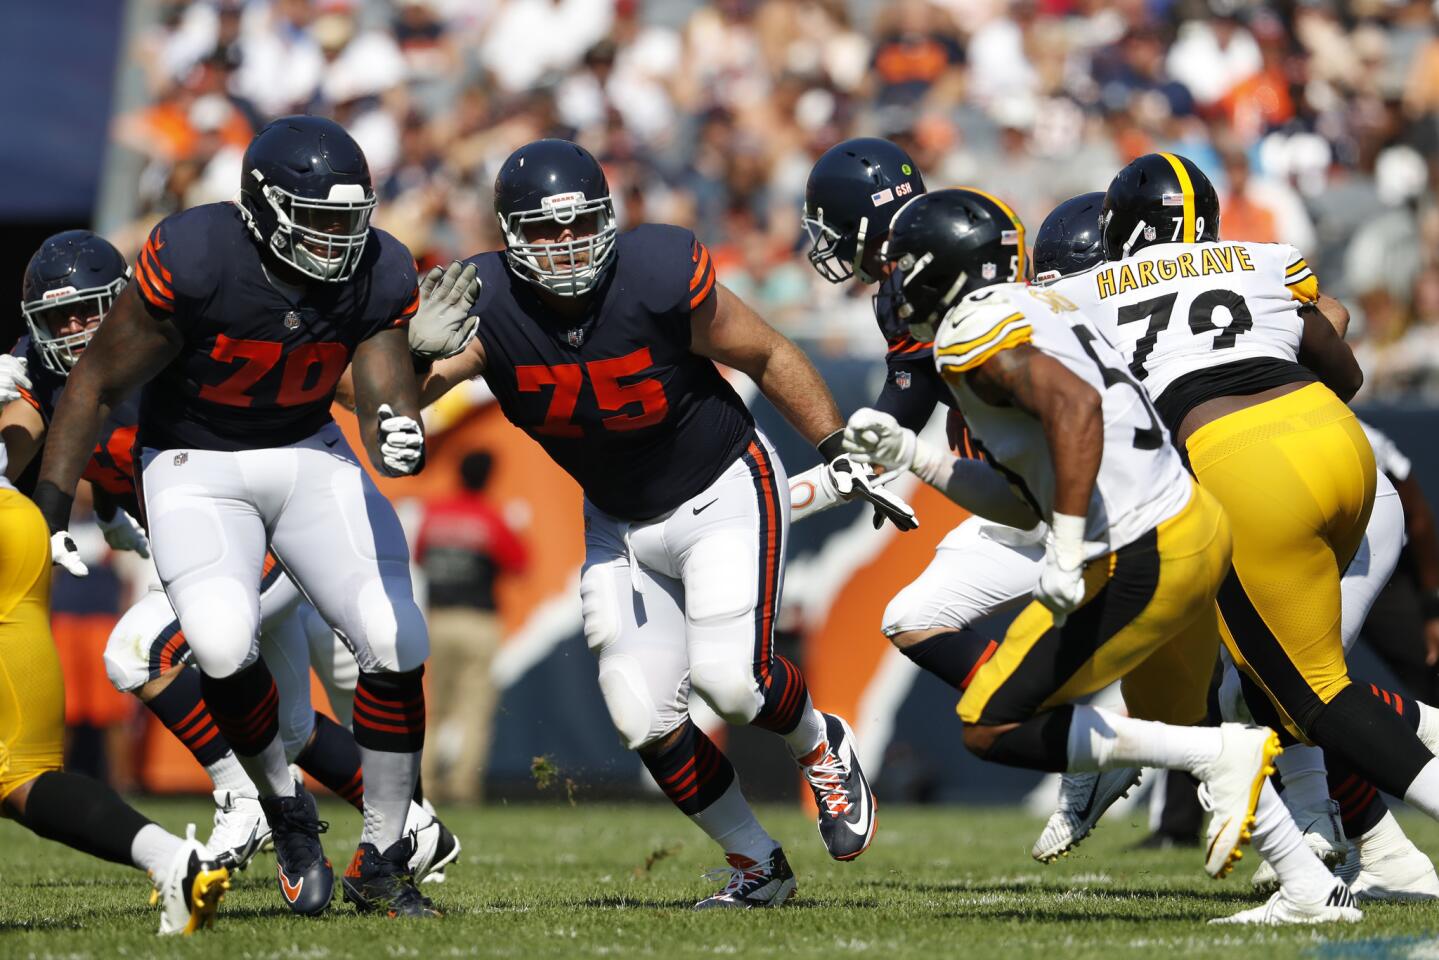 Bears offensive tackle Bobby Massie (70) and offensive guard Kyle Long (75) in the third quarter against the Steelers at Soldier Field on Sunday, Sept. 24, 2017.